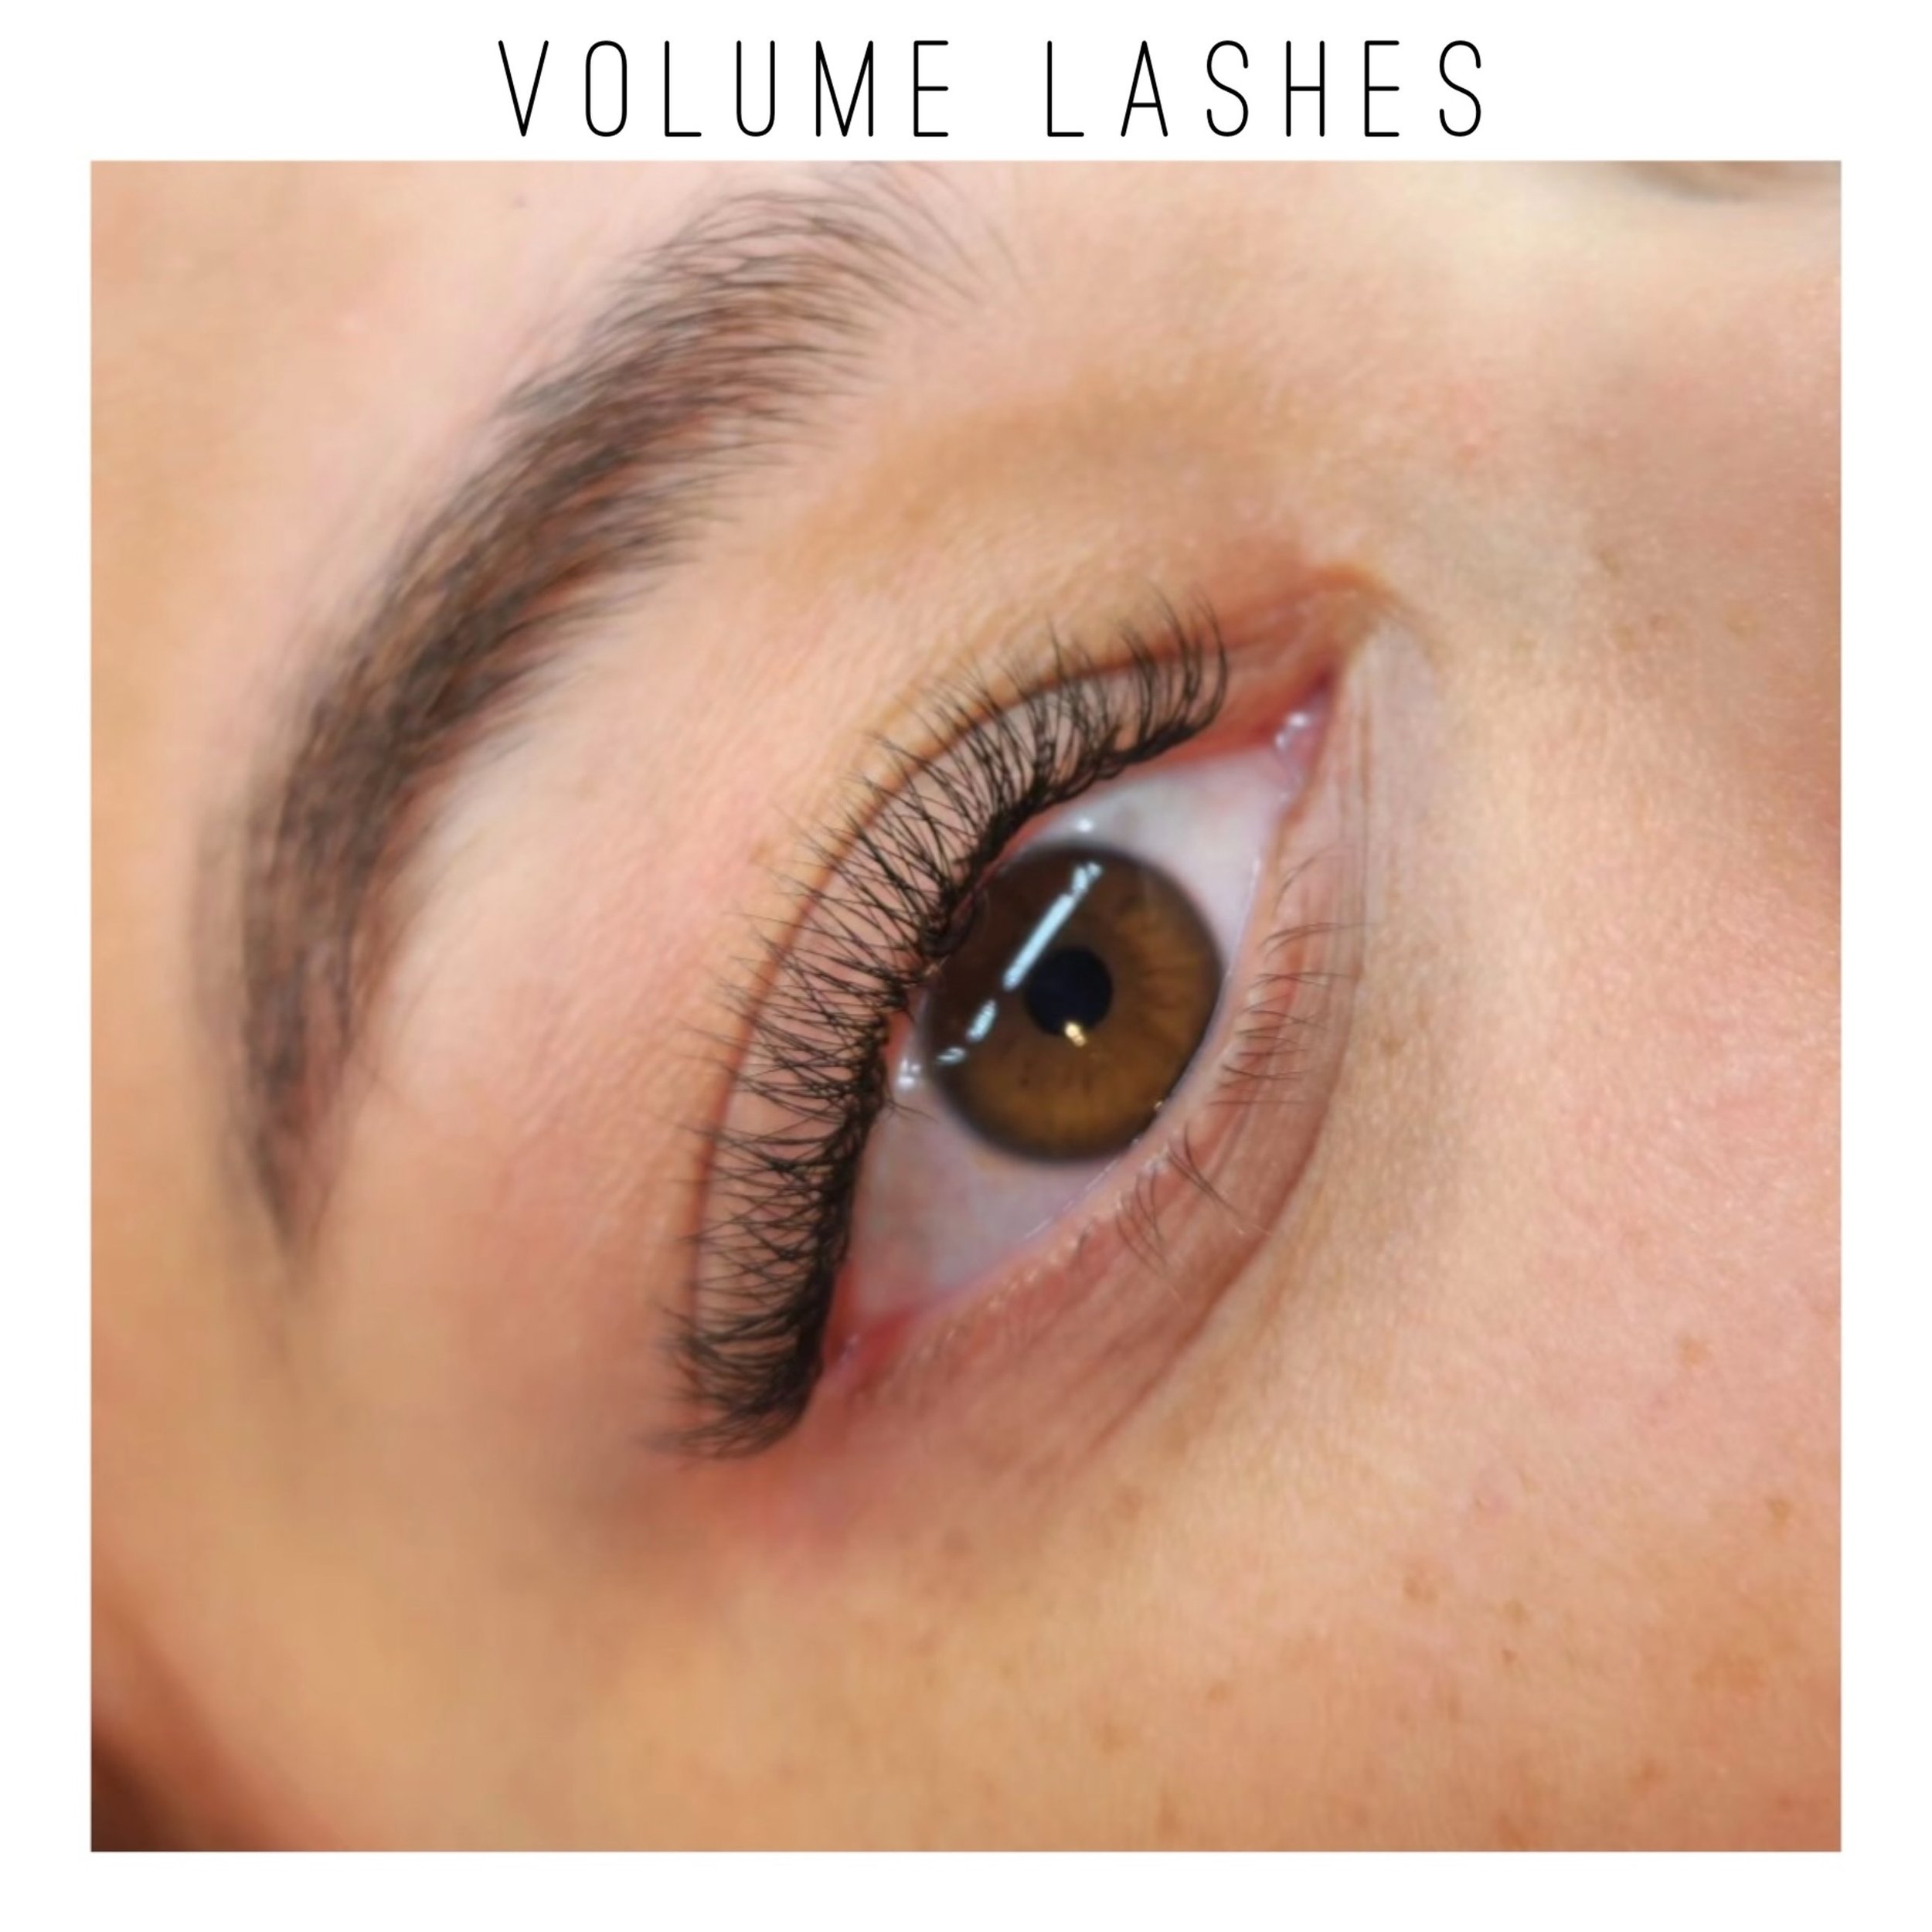 Sorry, I can&rsquo;t hear you over the volume of my lashes. If you&rsquo;re looking for a little drama and a lot of glam, these are the lashes for you. This technique utilizes extremely fine extensions that are &ldquo;fanned&rdquo; out on each of you